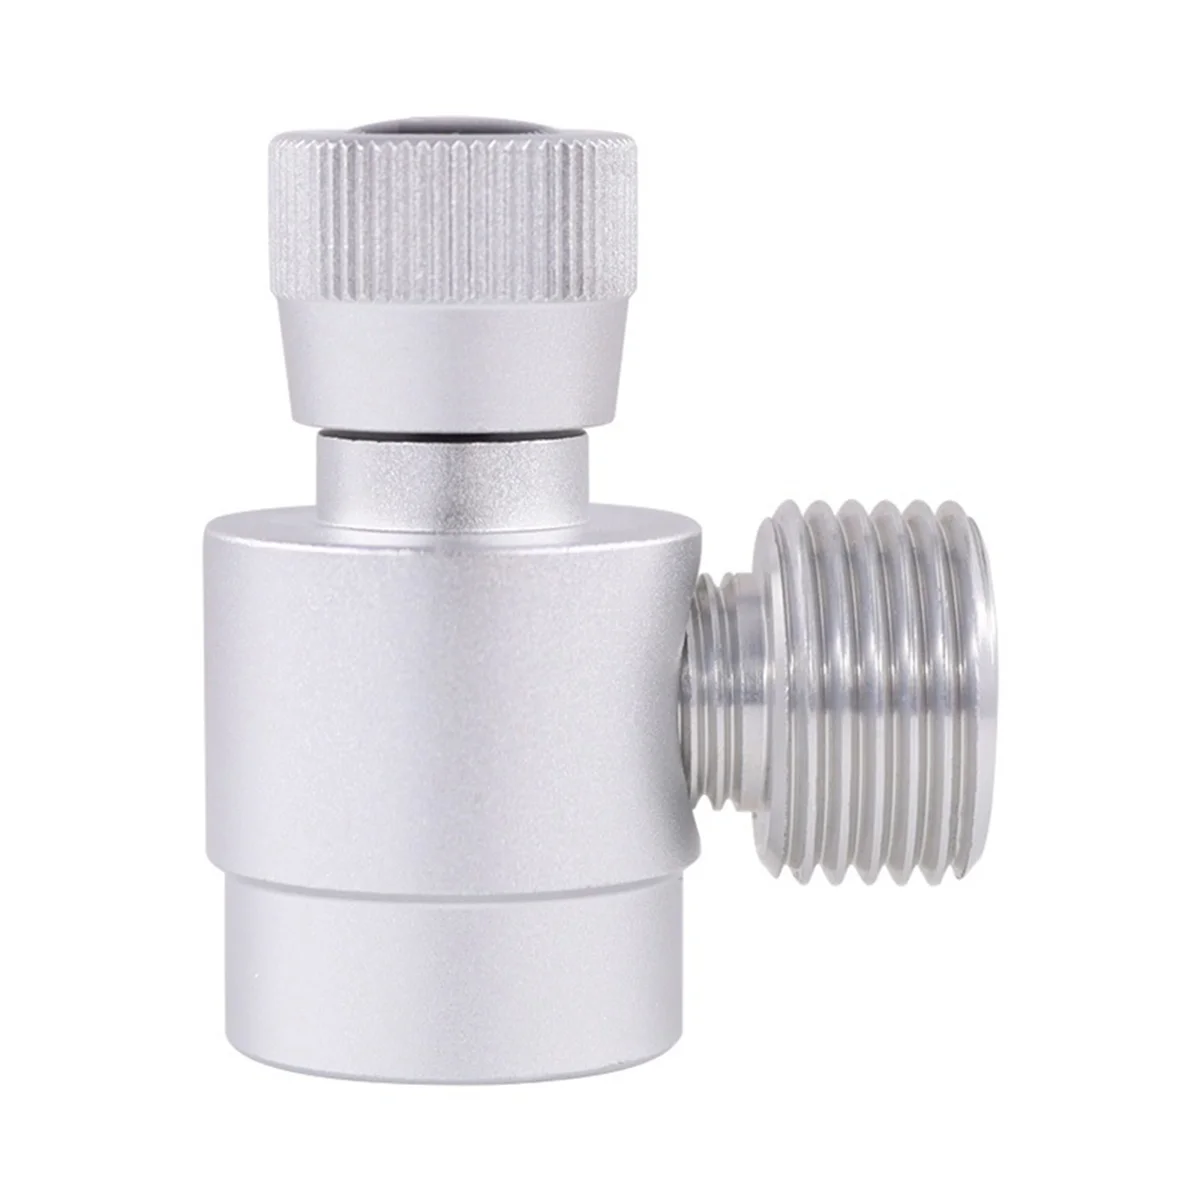 

CO2 Cylinder Refill Adapter, Self-Made Gas Cylinder Regulator M10X1 to W21.8-14 Adapter for Argon,CO2,Mixed Gas,Silver